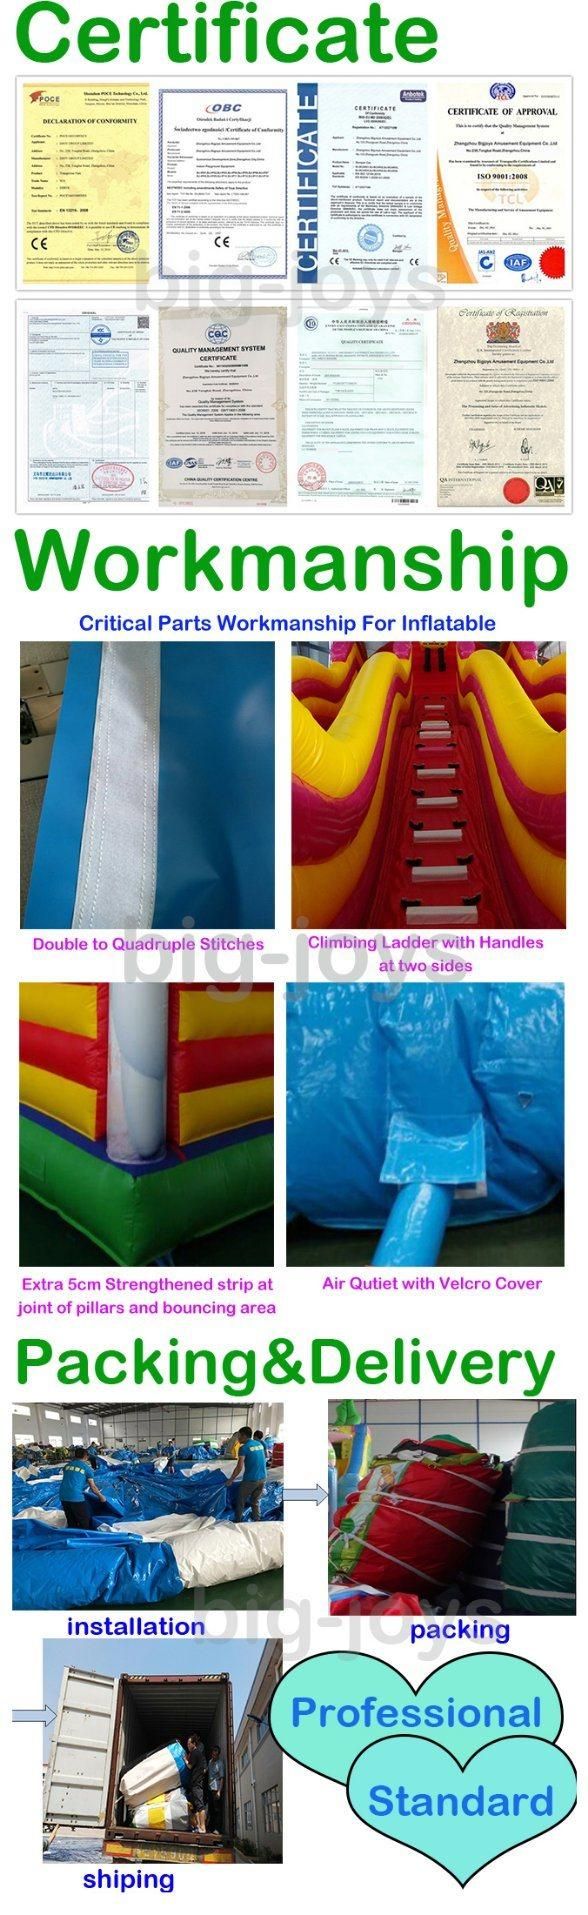 Inflatable Water Blobs , Blob Water Toy  (water park-12)